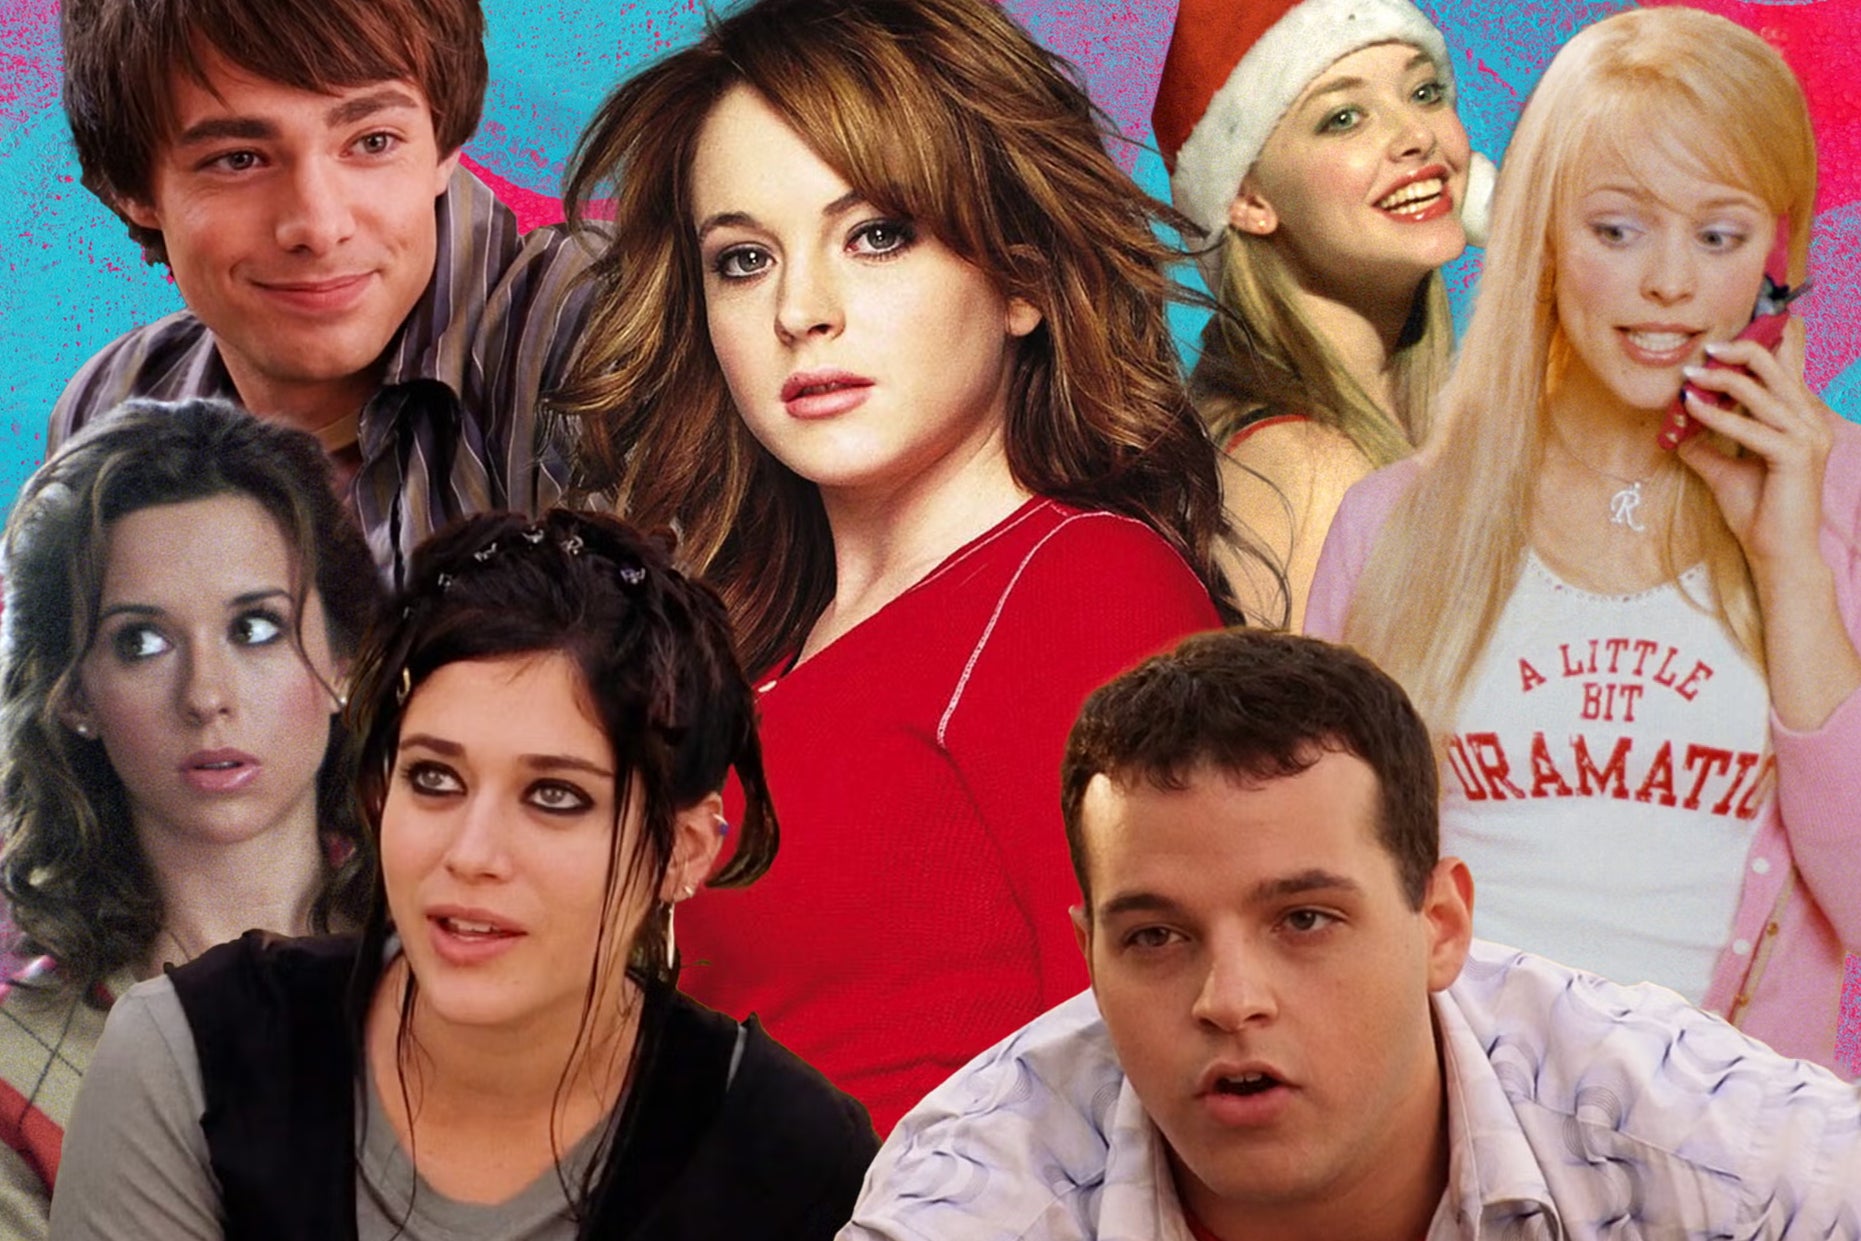 Too gay to function: the cast of the original ‘Mean Girls’, which has rapidly become a touchstone movie for queer teens